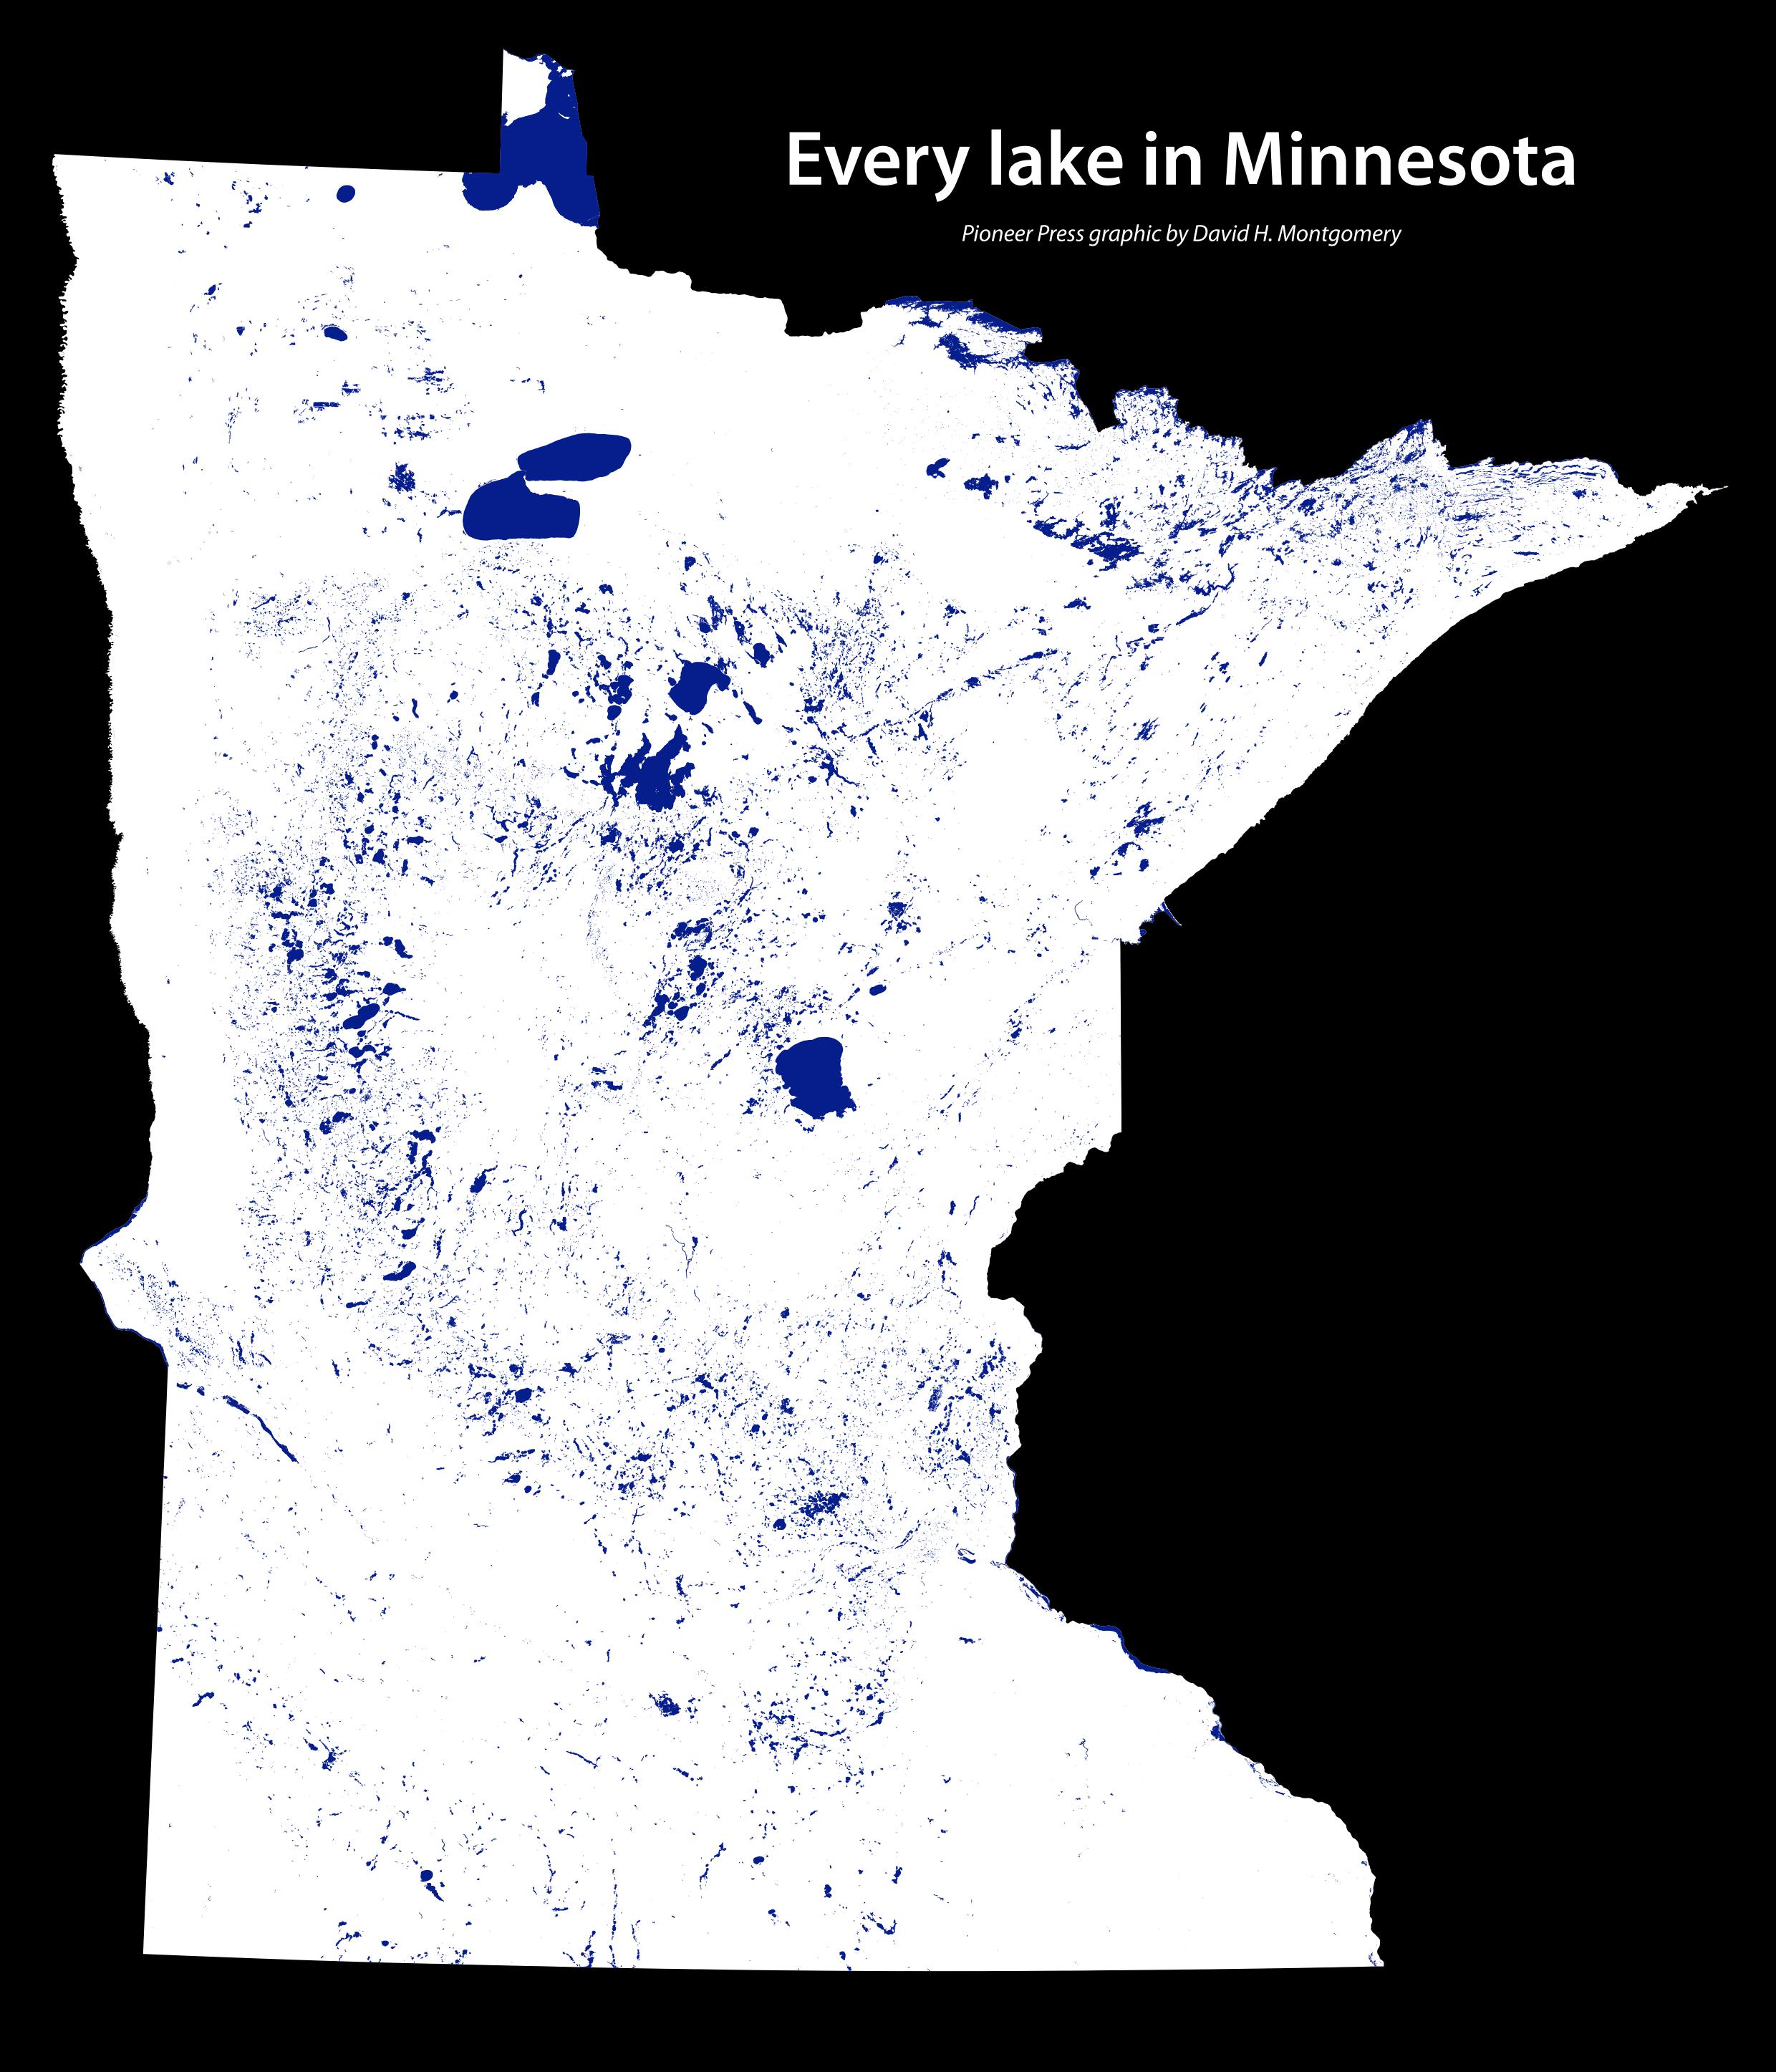 minnesota have does many lakes How